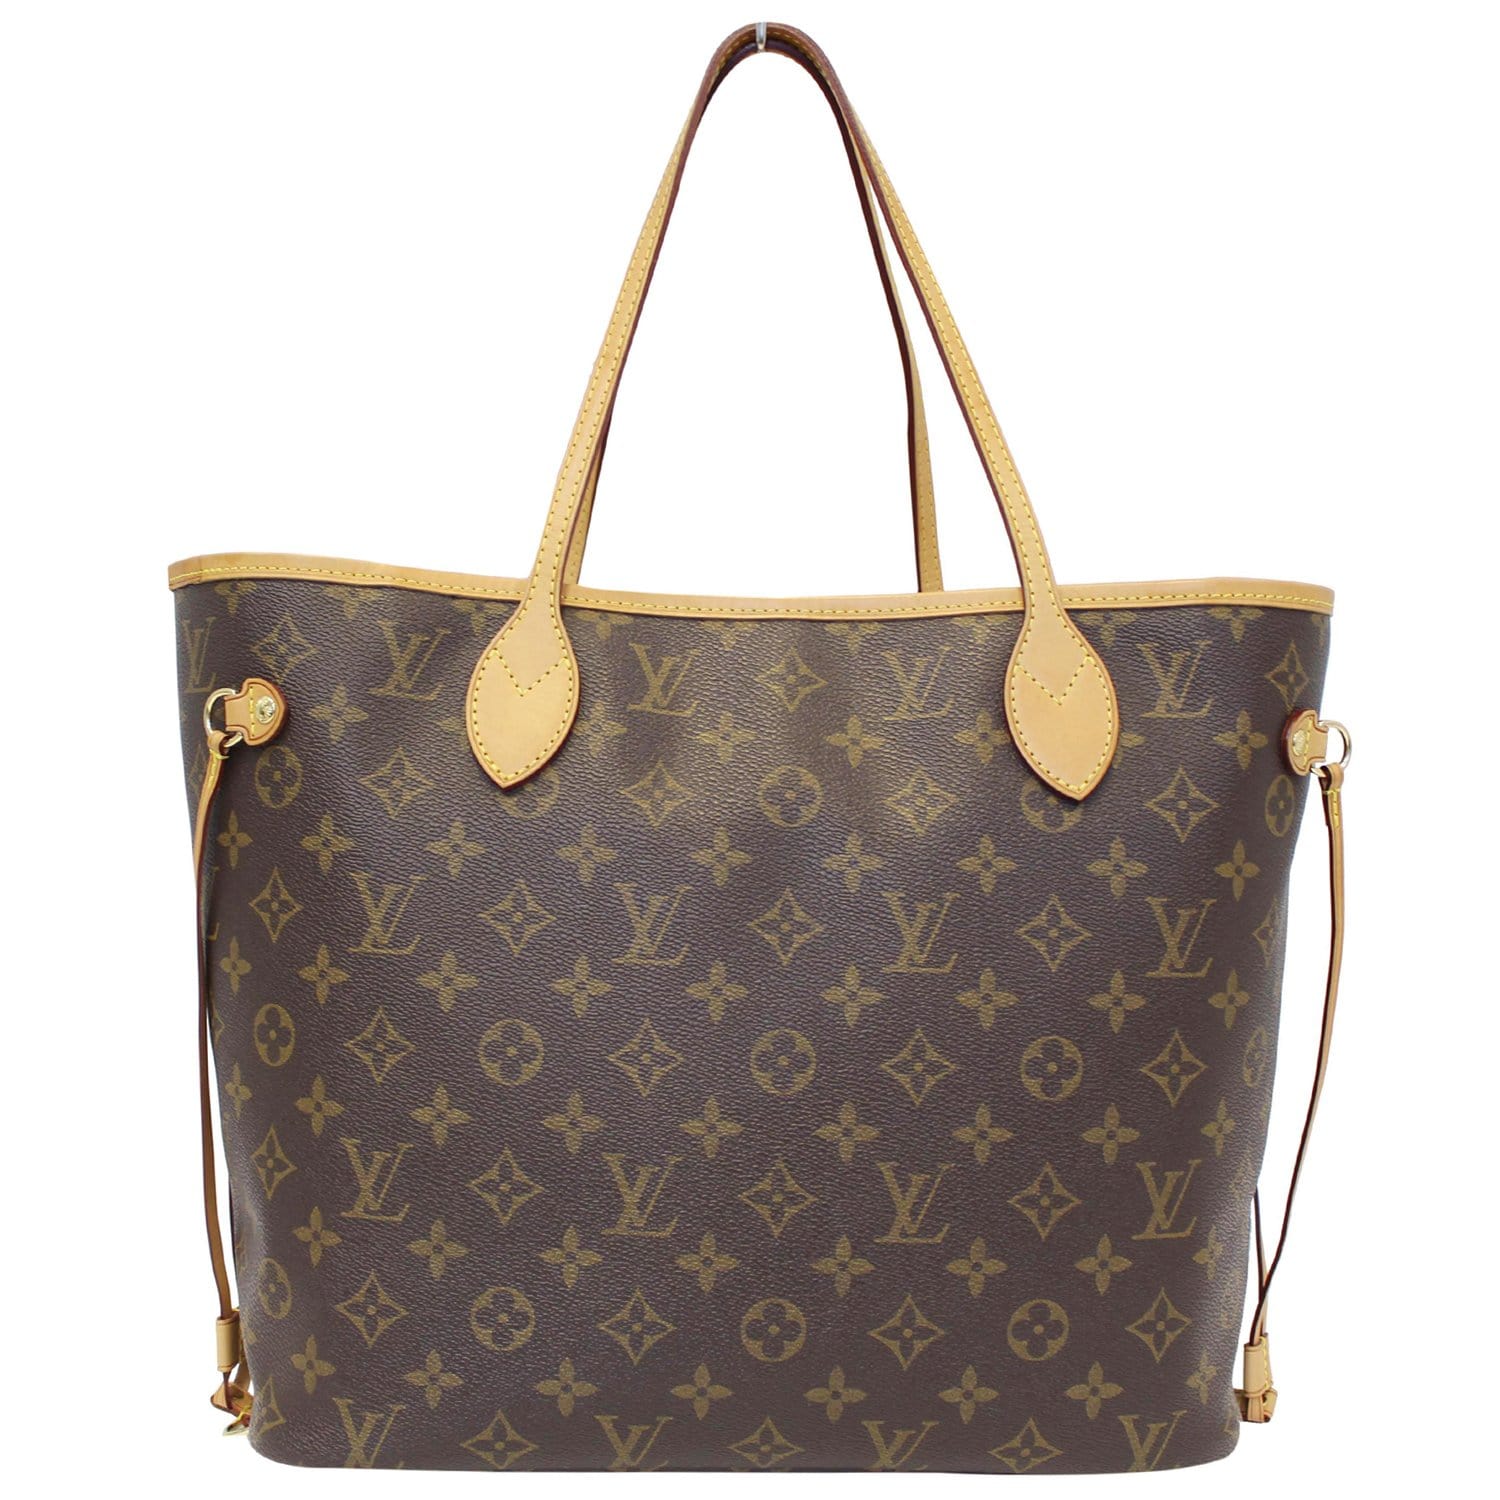 LOUIS VUITTON Neverfull MM Monogram Canvas Tote Bag Brown/Yellow